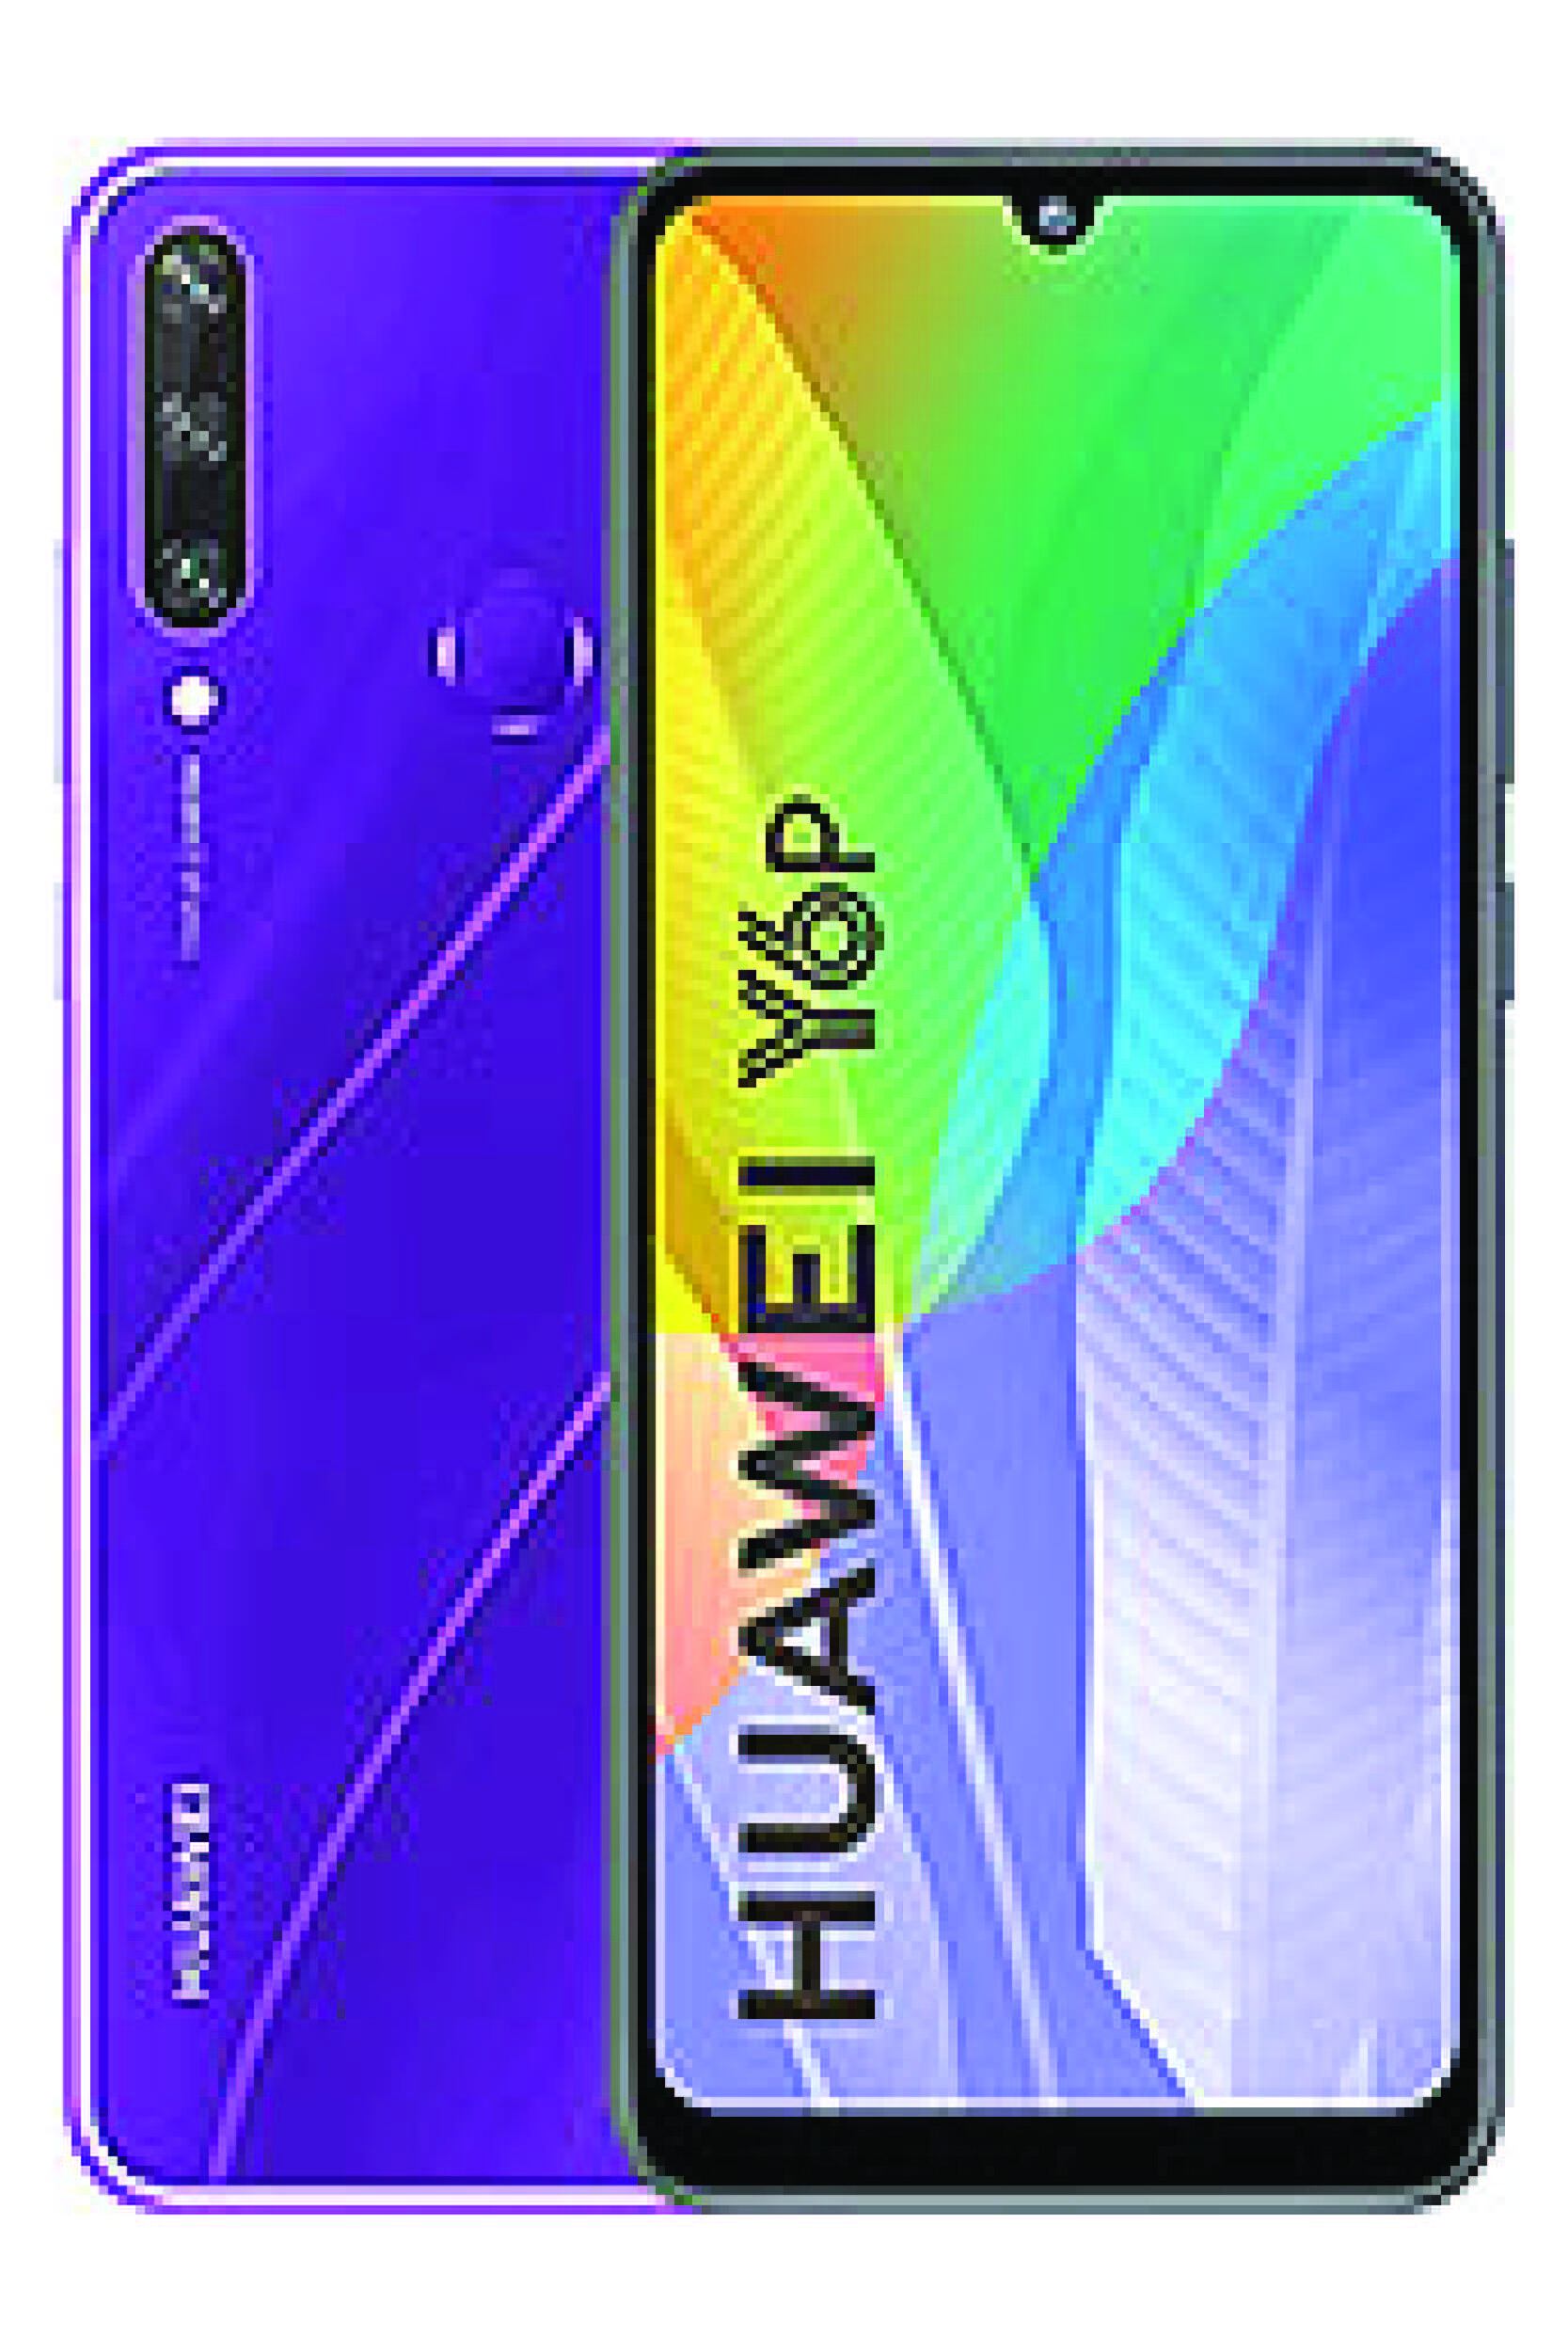 Y7 2019price Huawei Mobile New Model 2020 Price In Pakistan